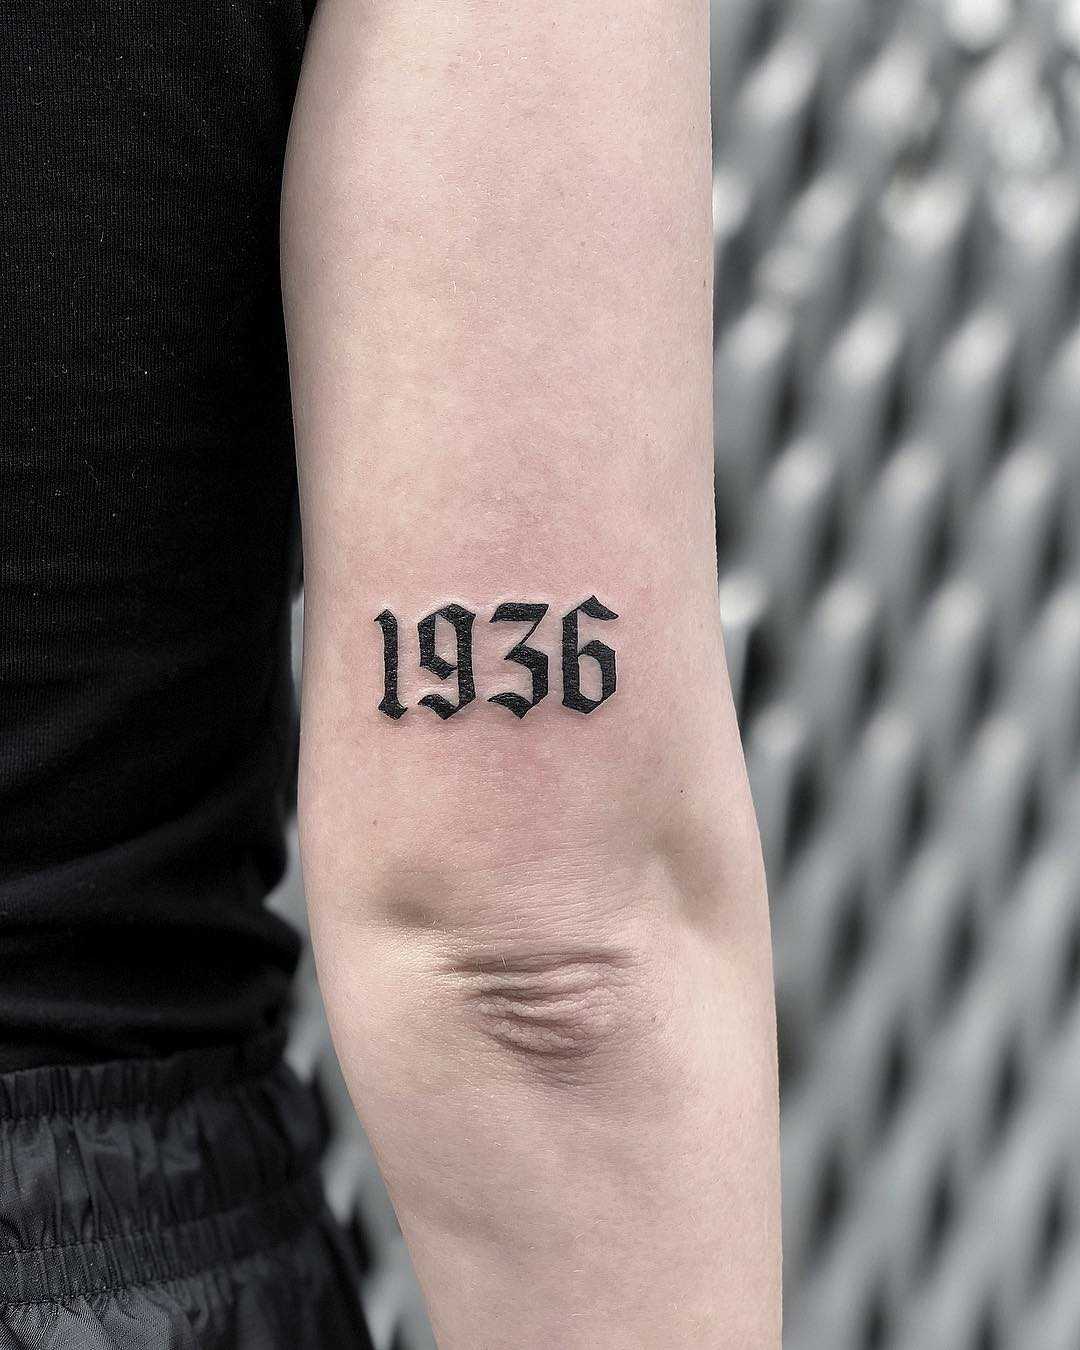 1936 tattoo meaning